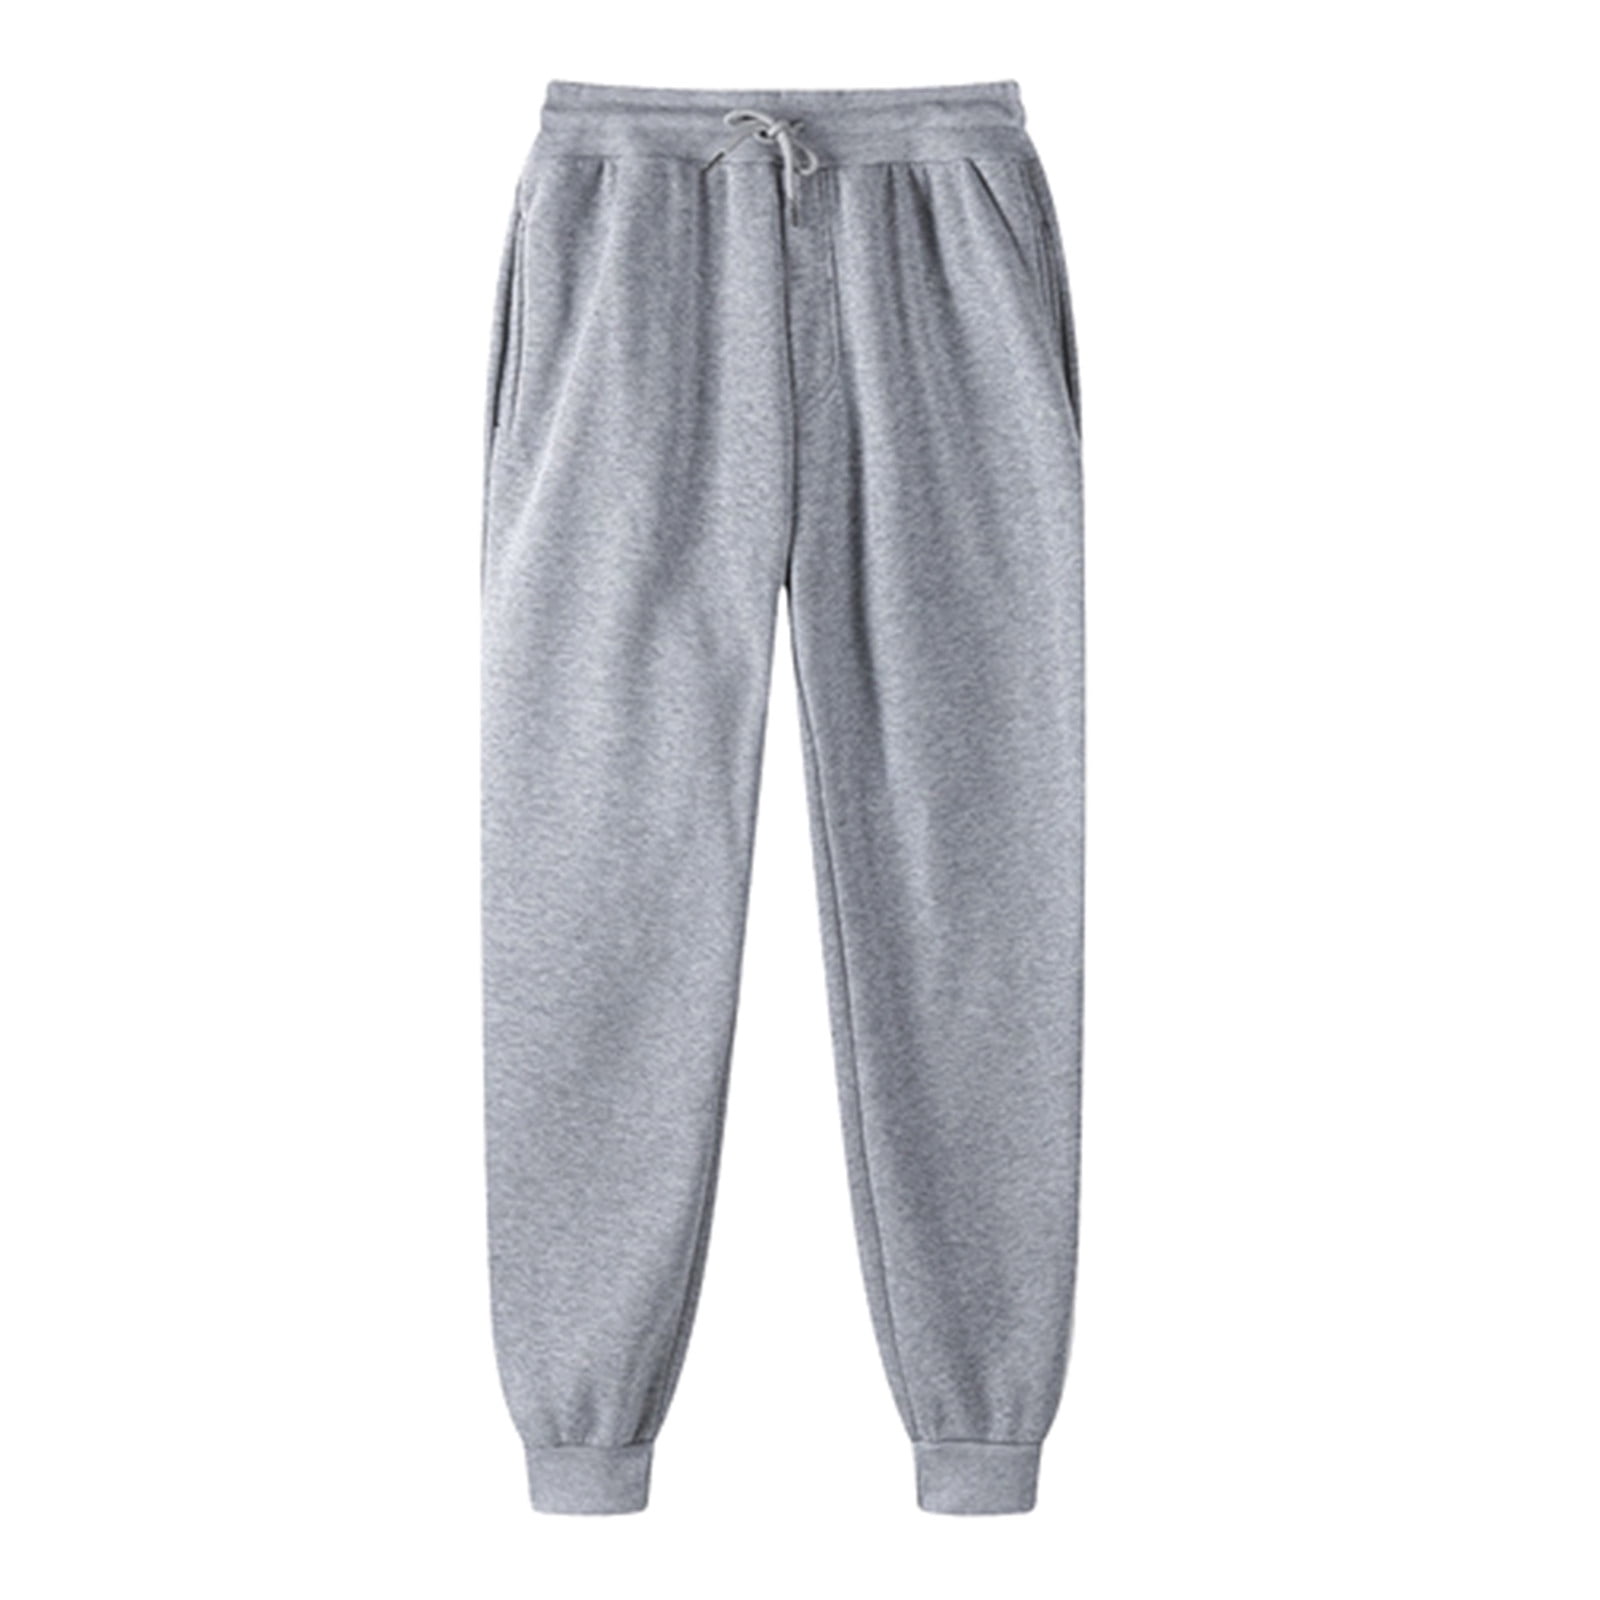 symoid Mens Athletic Sweatpants- Casual Trousers and Trousers Plus ...